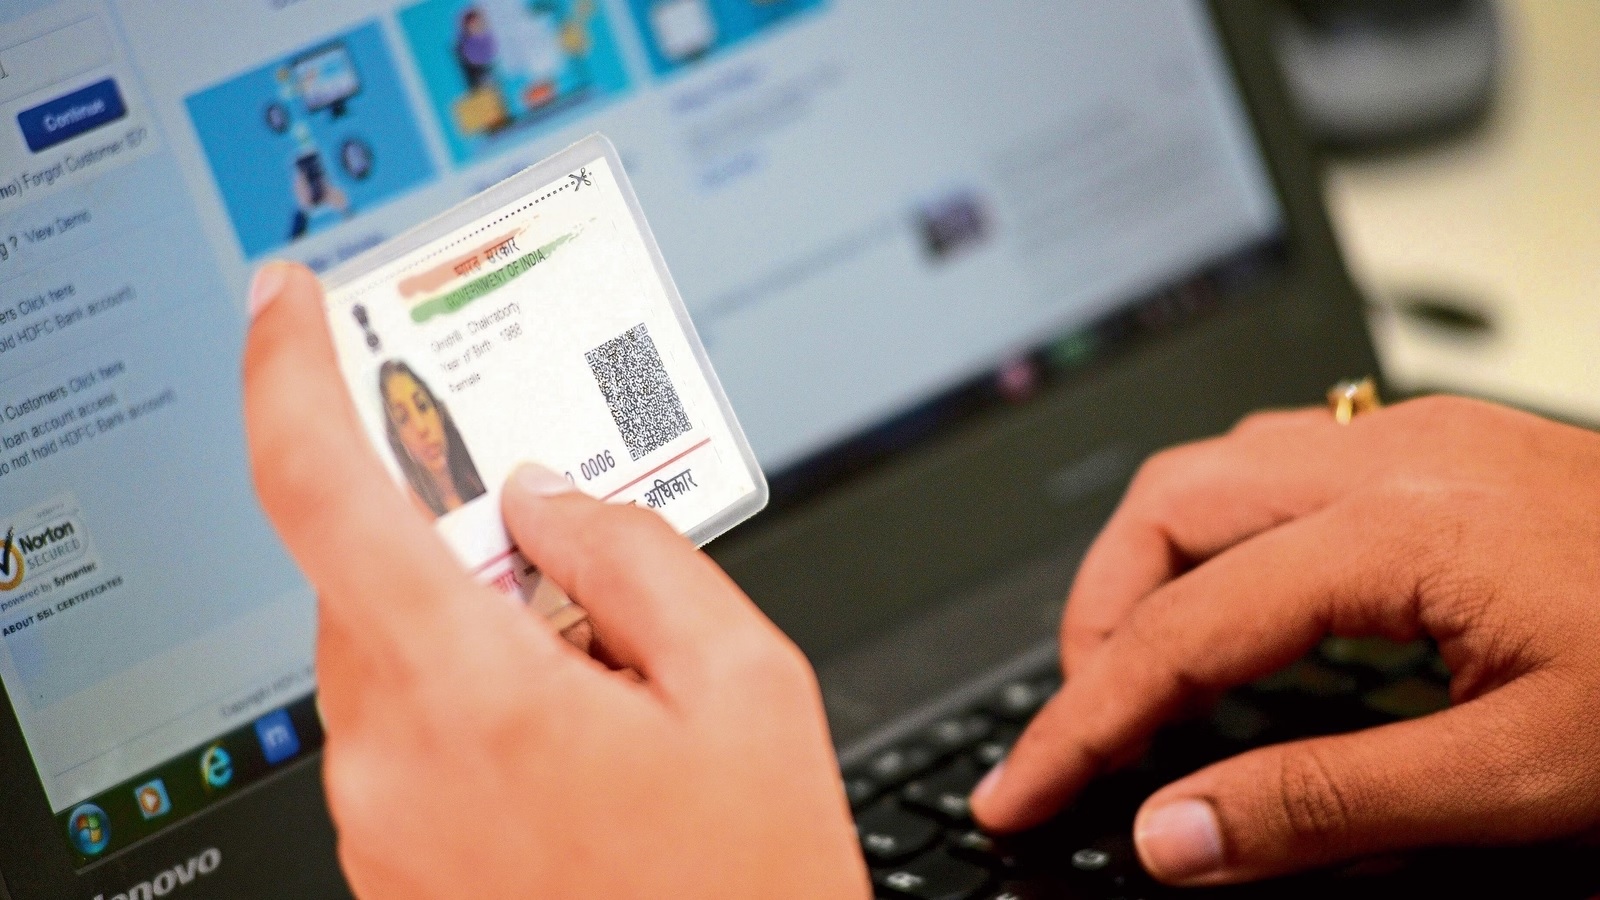 Aadhaar update: Mobile number and E-mail ID will be updated, no need to go to the center